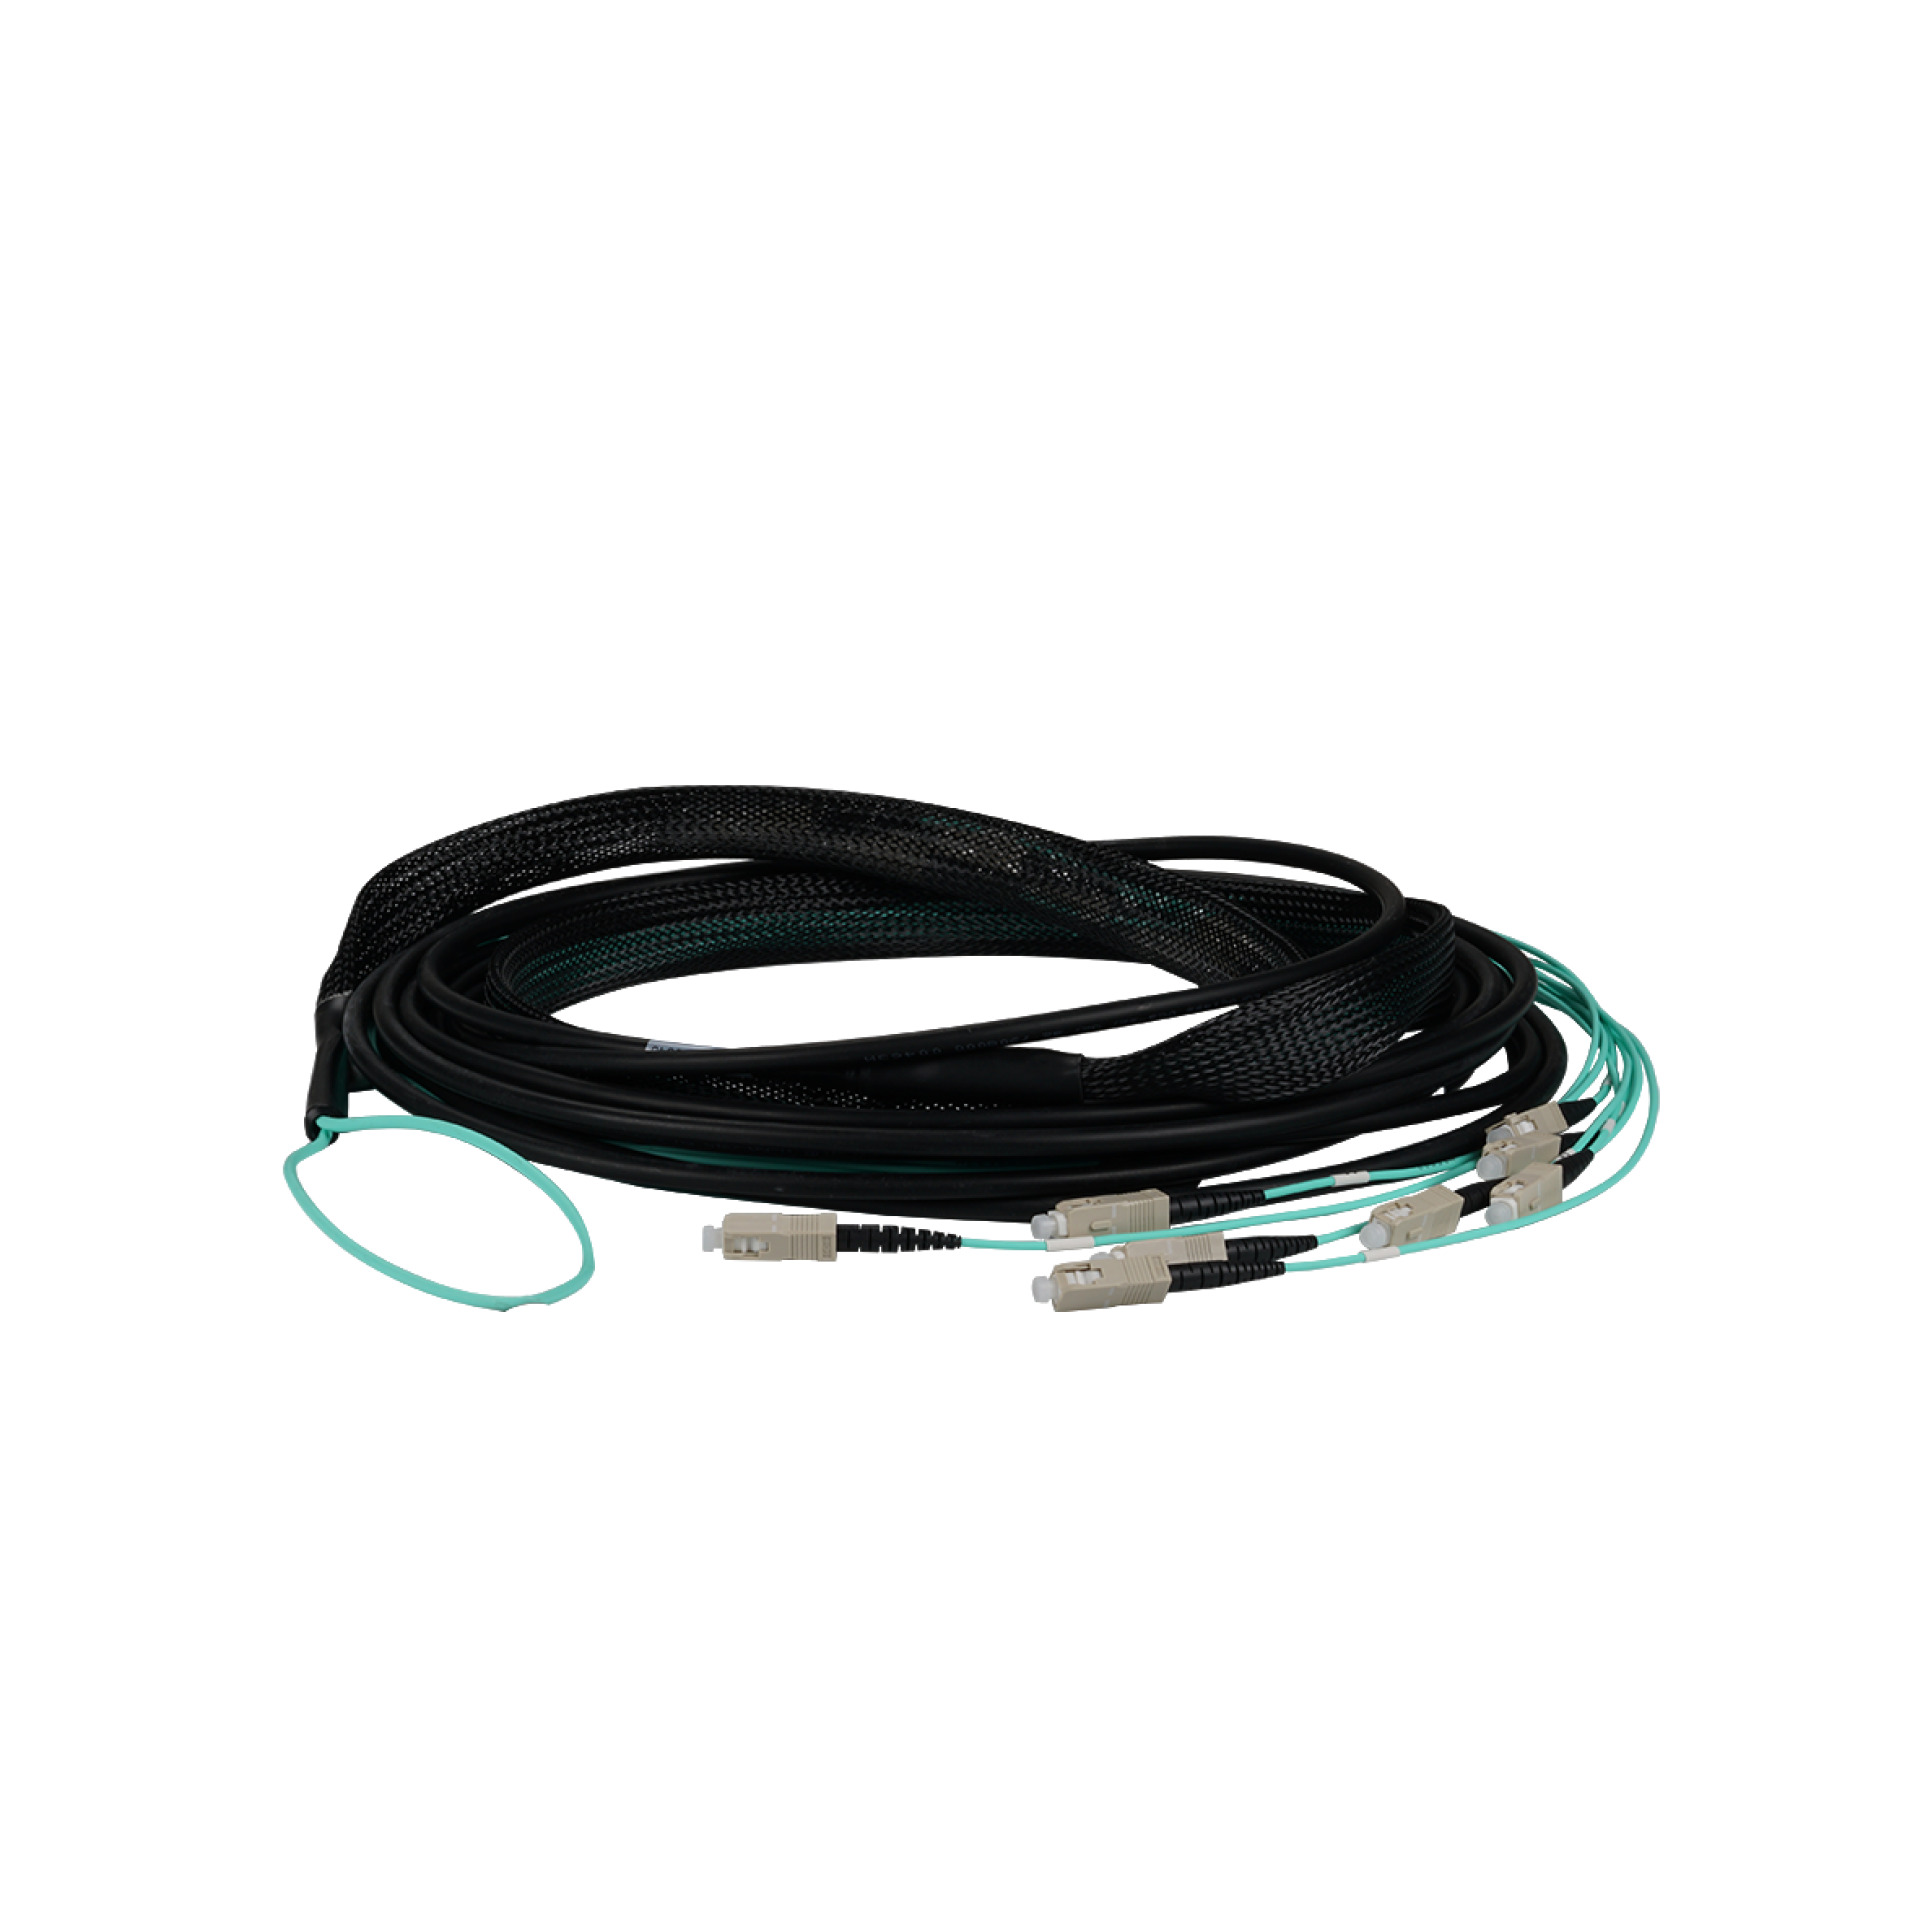 Trunk cable U-DQ(ZN)BH 4G 50/125, SC/SC OM3 90m